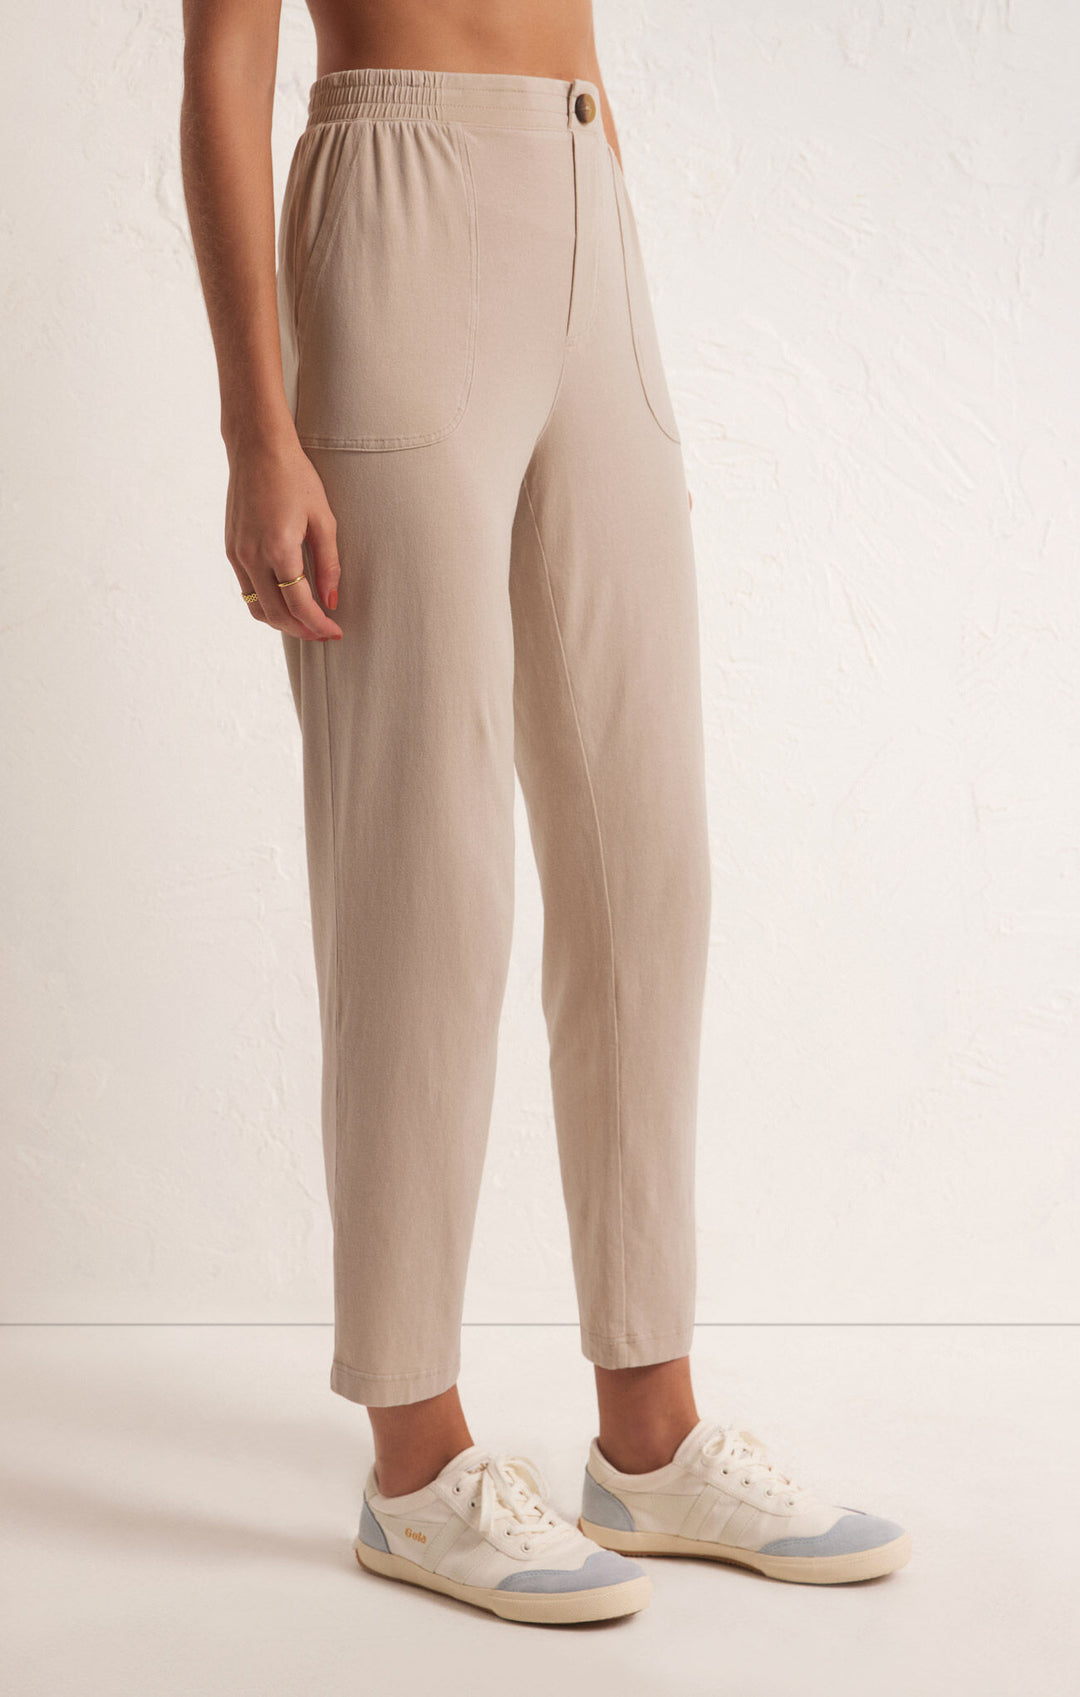 Z Supply Kendall Jersey Pant in Birch